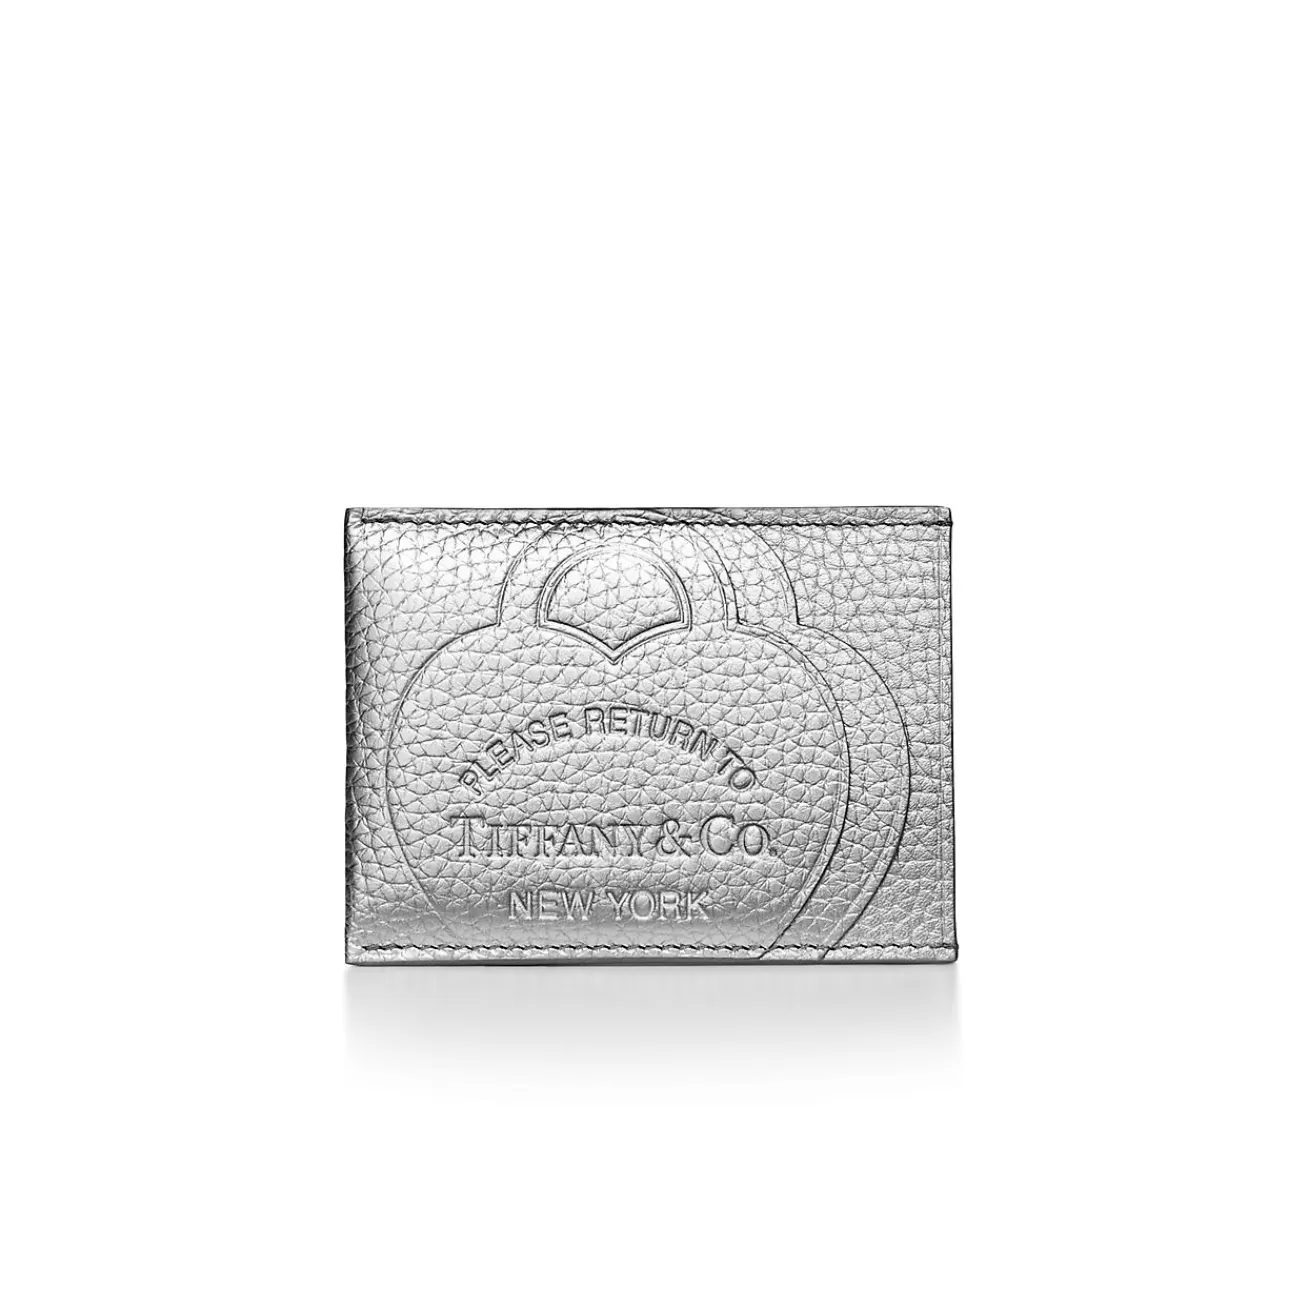 Tiffany & Co. Return to Tiffany® Card Case in Silver-colored Leather | ^Women Business Gifts | Small Leather Goods